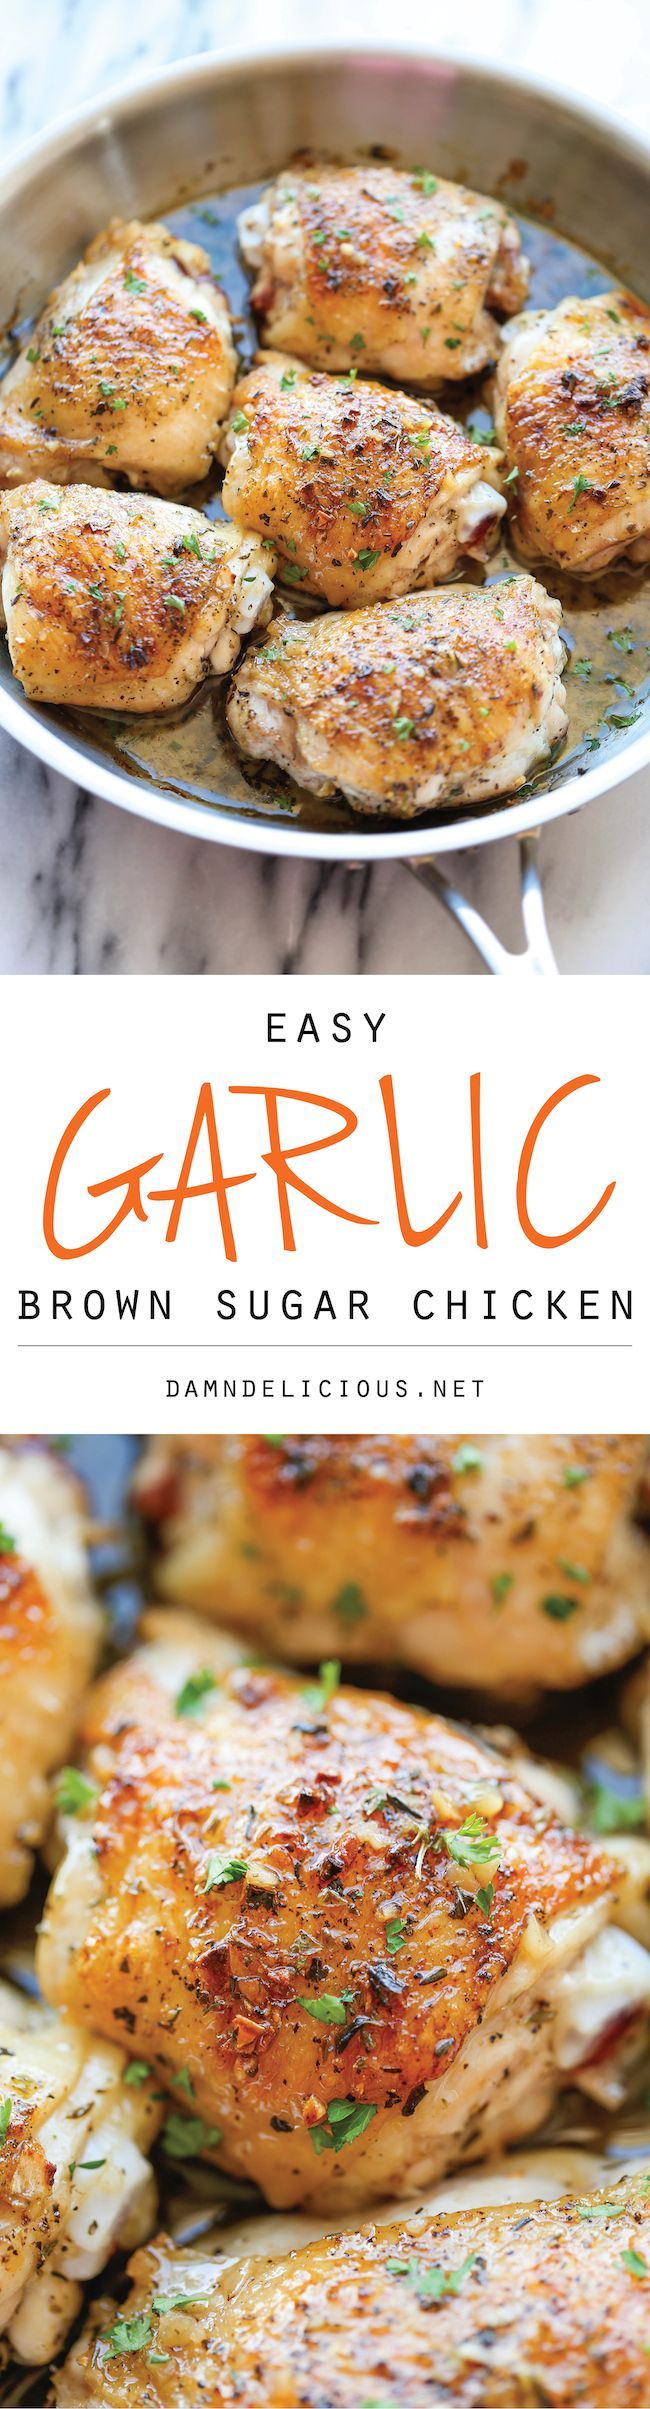 Garlic Brown Sugar Chicken – The best and easiest chicken ever, baked to crisp-tender perfection along with the most amazing sweet